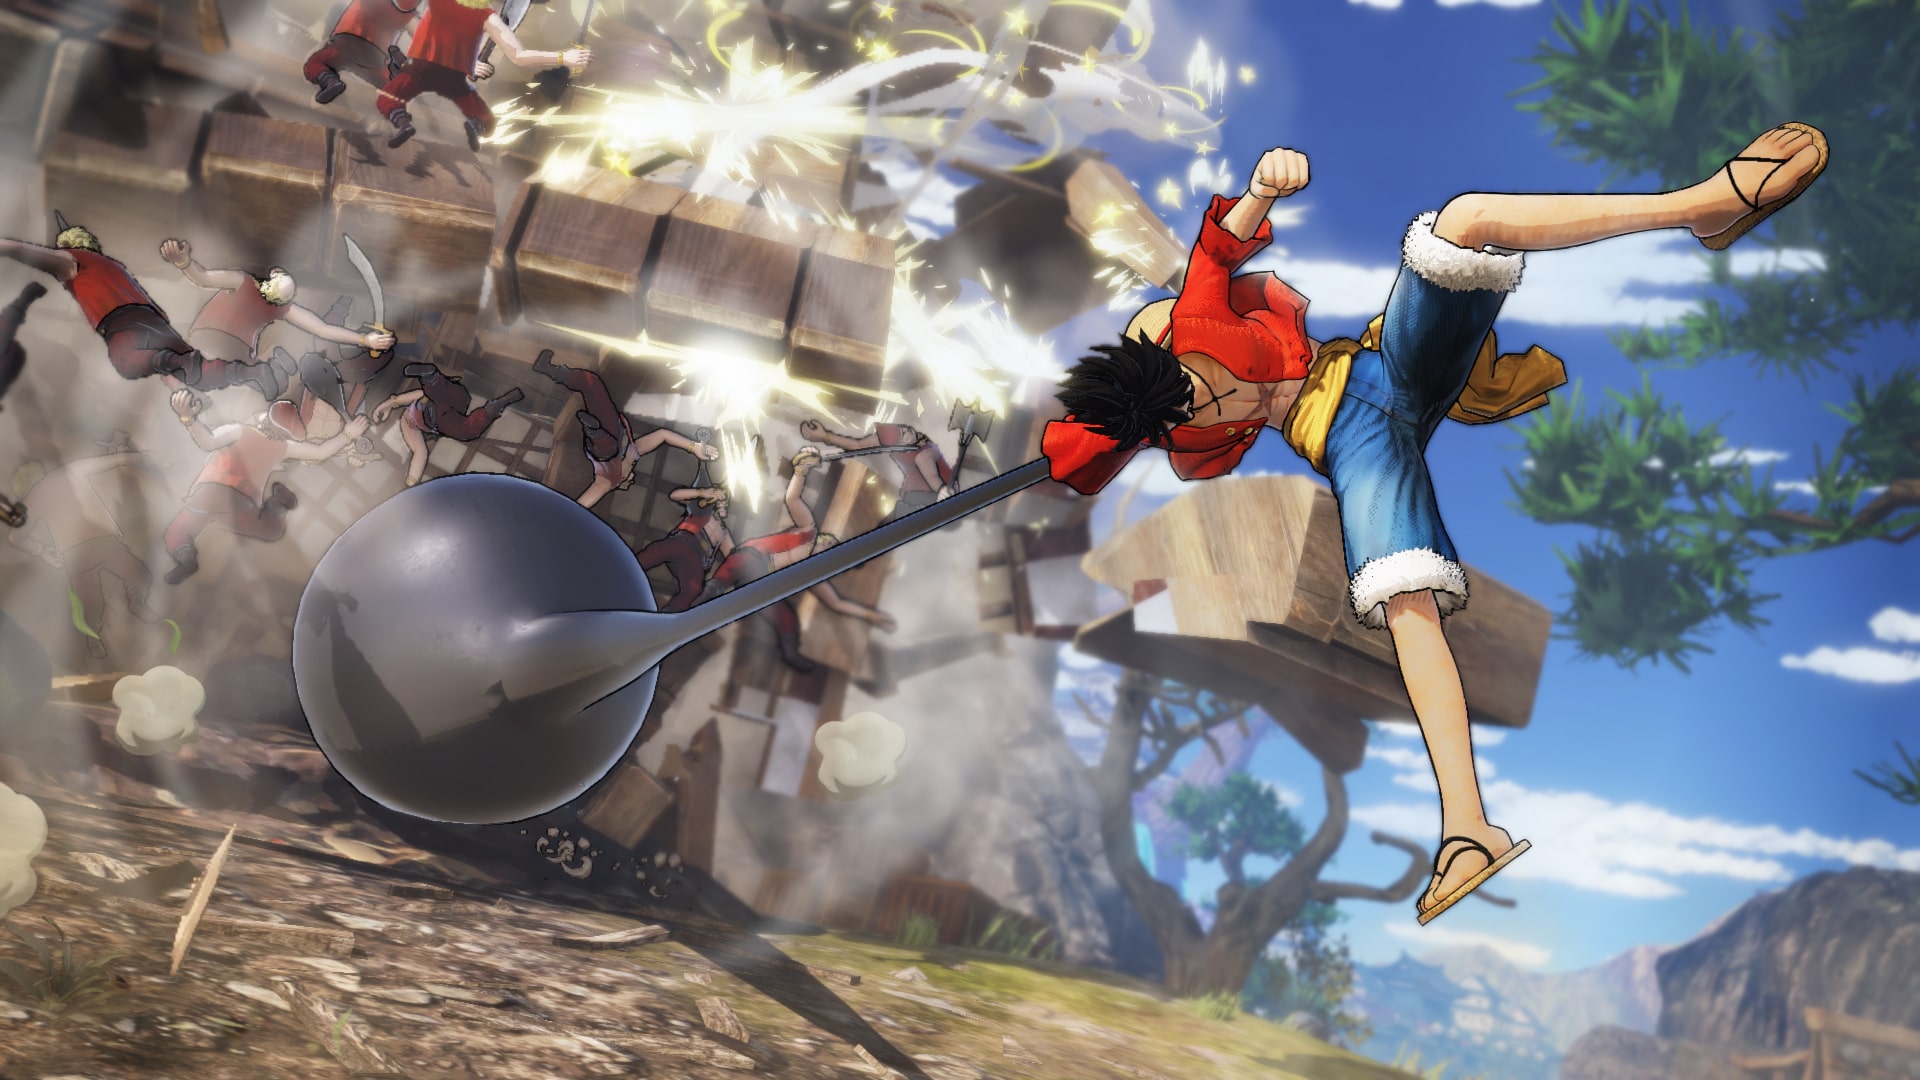 one-piece-pirate-warriors-4-deluxe-edition-on-ps4-price-history-screenshots-discounts-usa